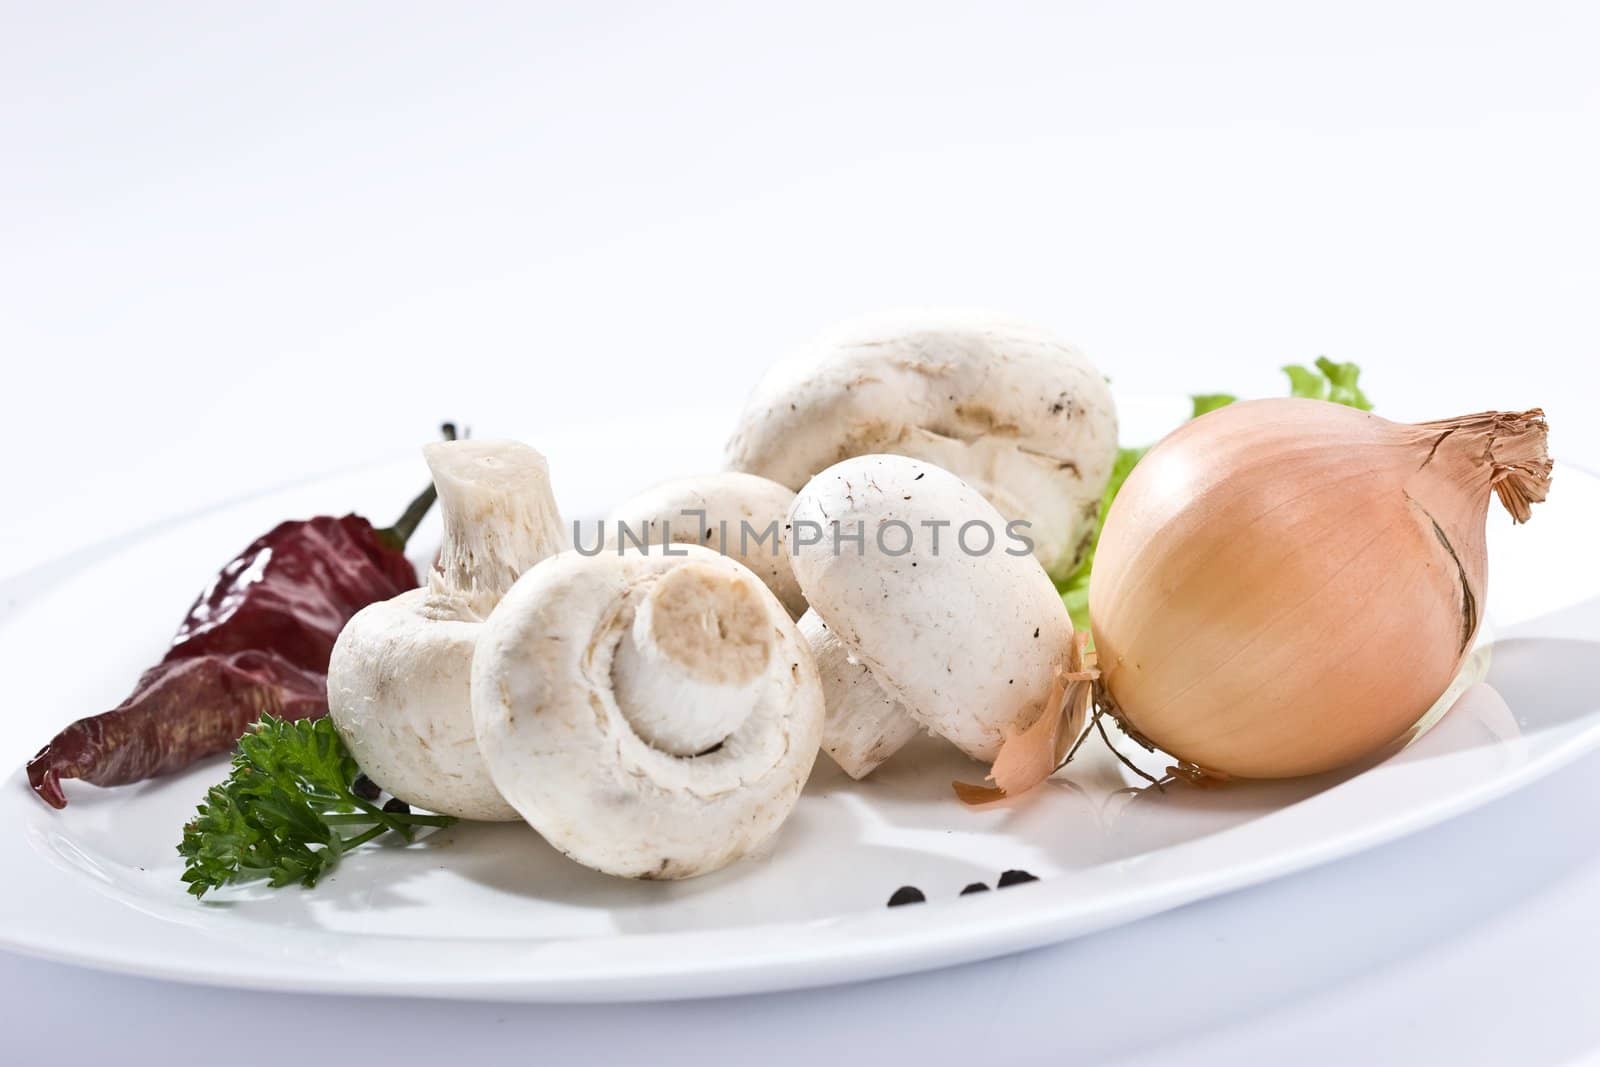 food series: some mushrooms on the white plate